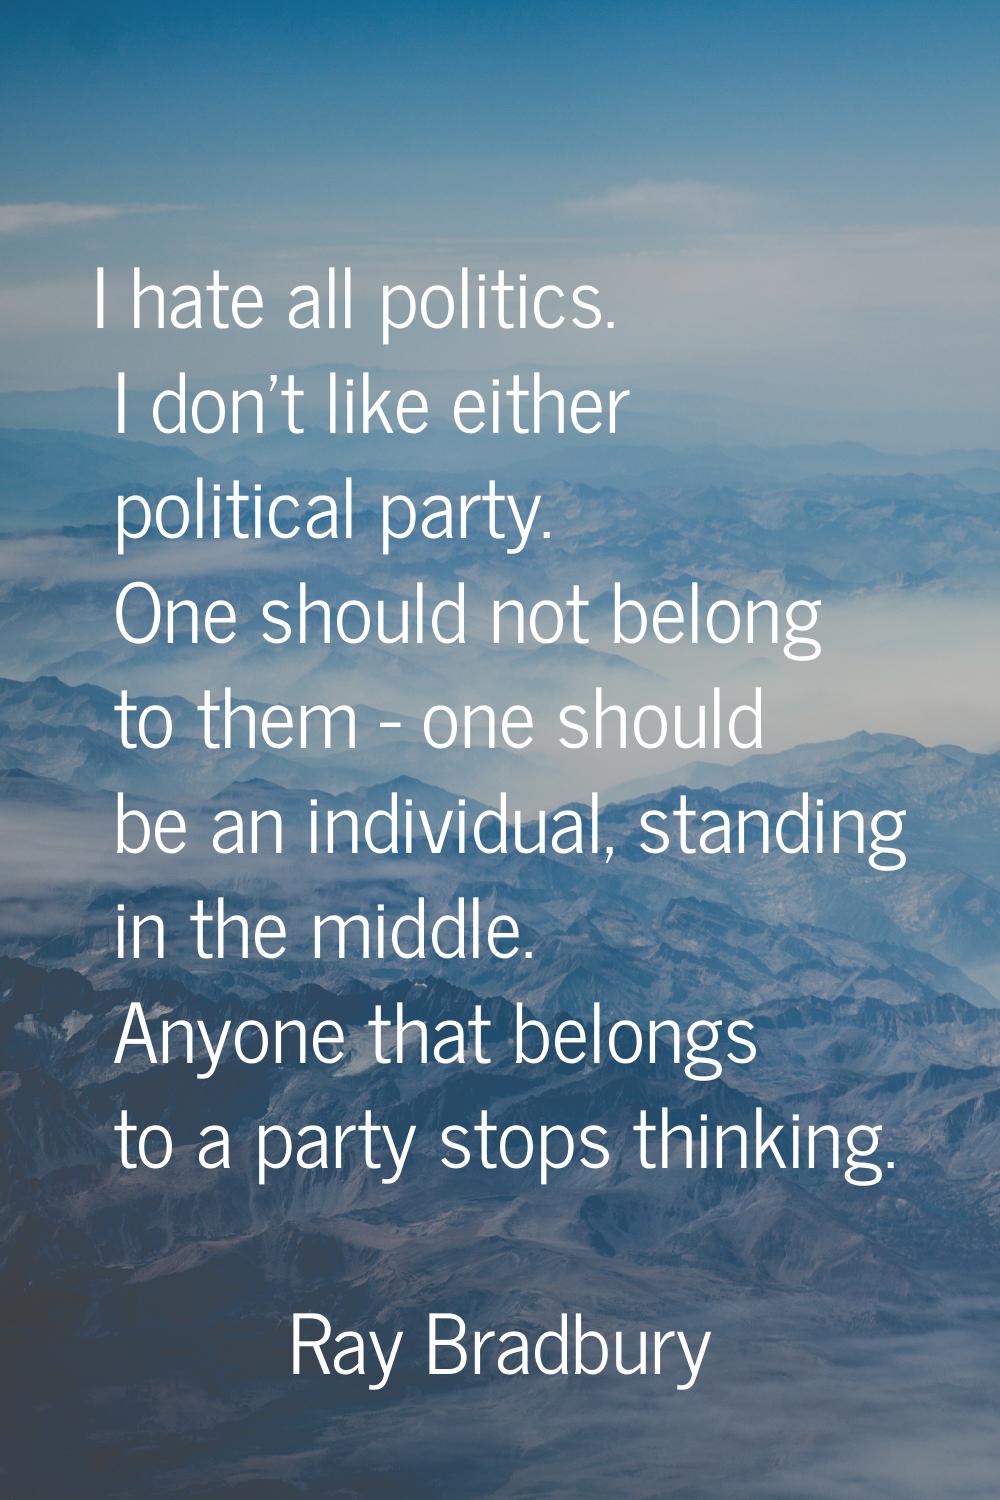 I hate all politics. I don't like either political party. One should not belong to them - one shoul